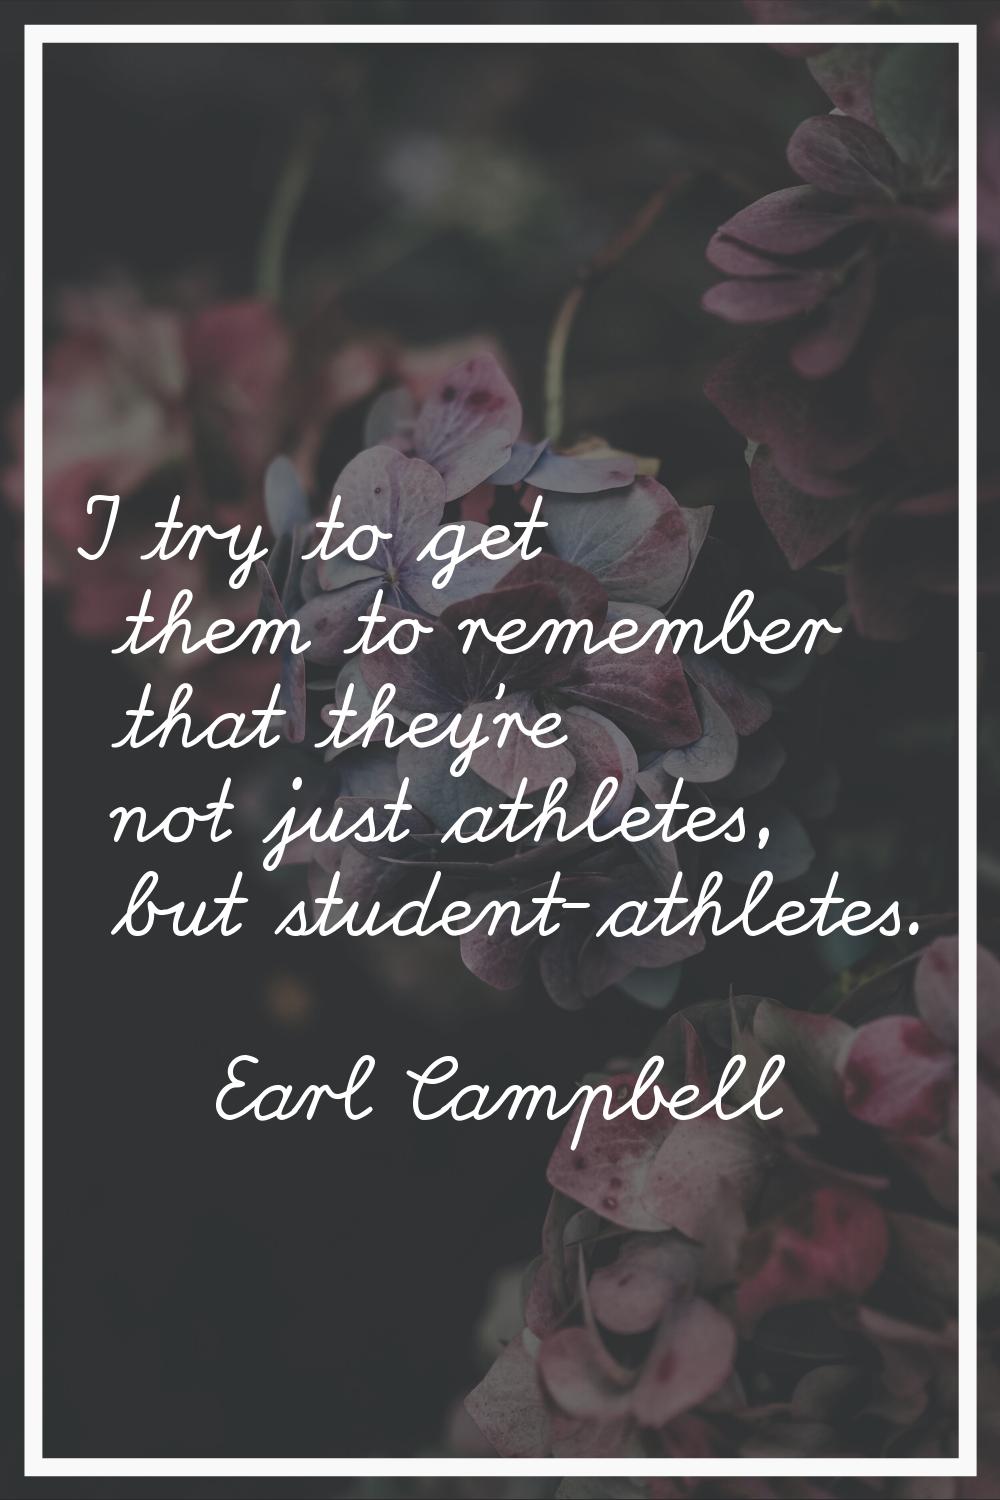 I try to get them to remember that they're not just athletes, but student-athletes.